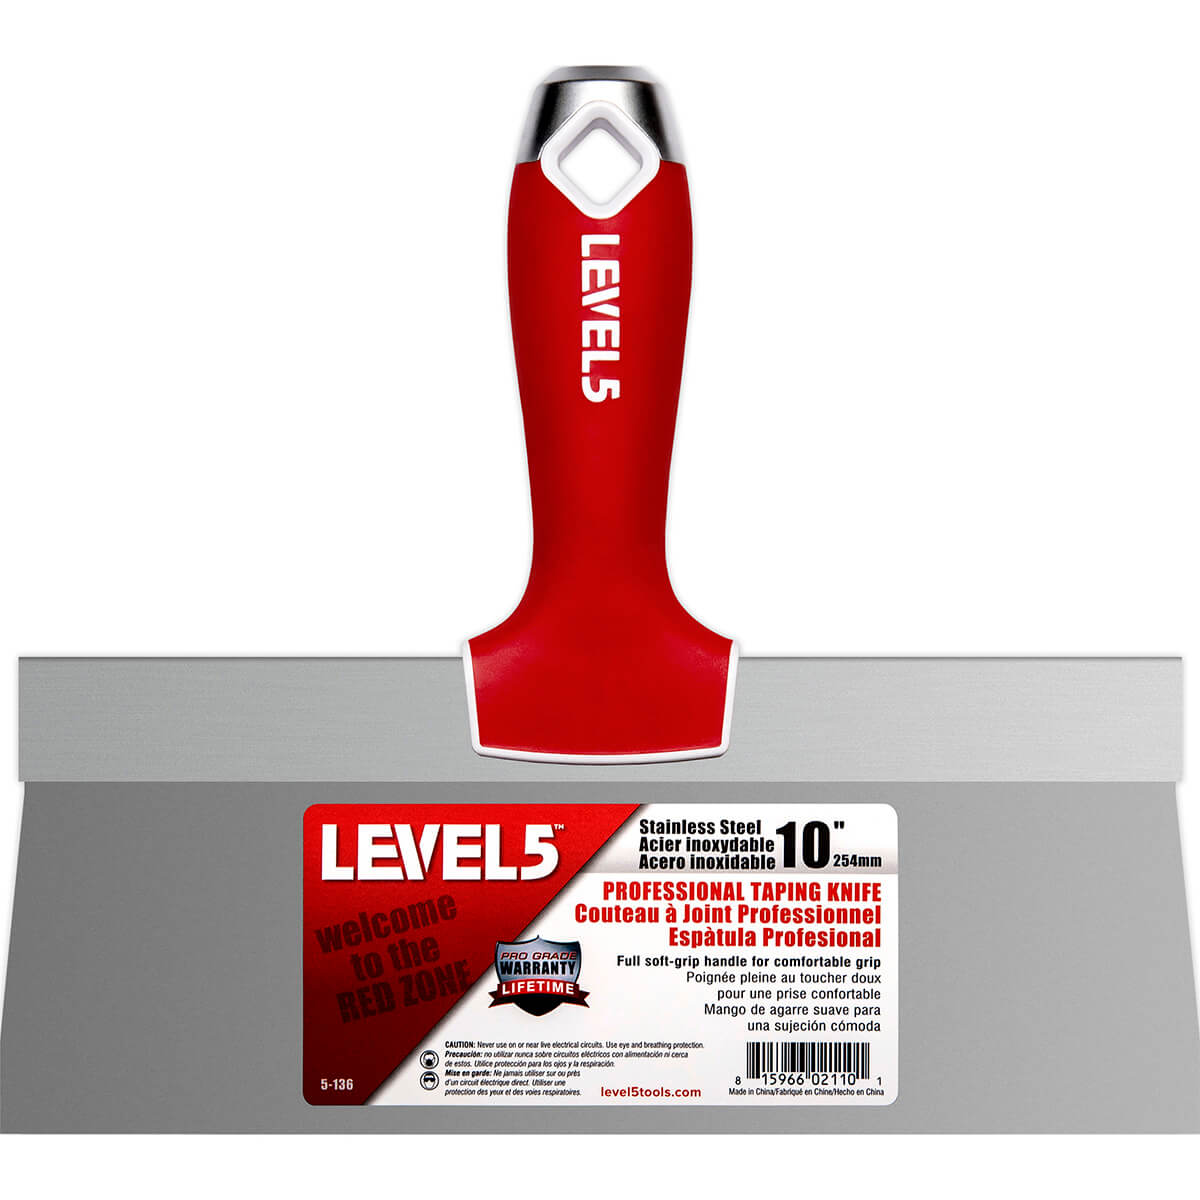 LEVEL5 10" Stainless Steel Taping Knife with Soft Grip Handle SKU: 5-136